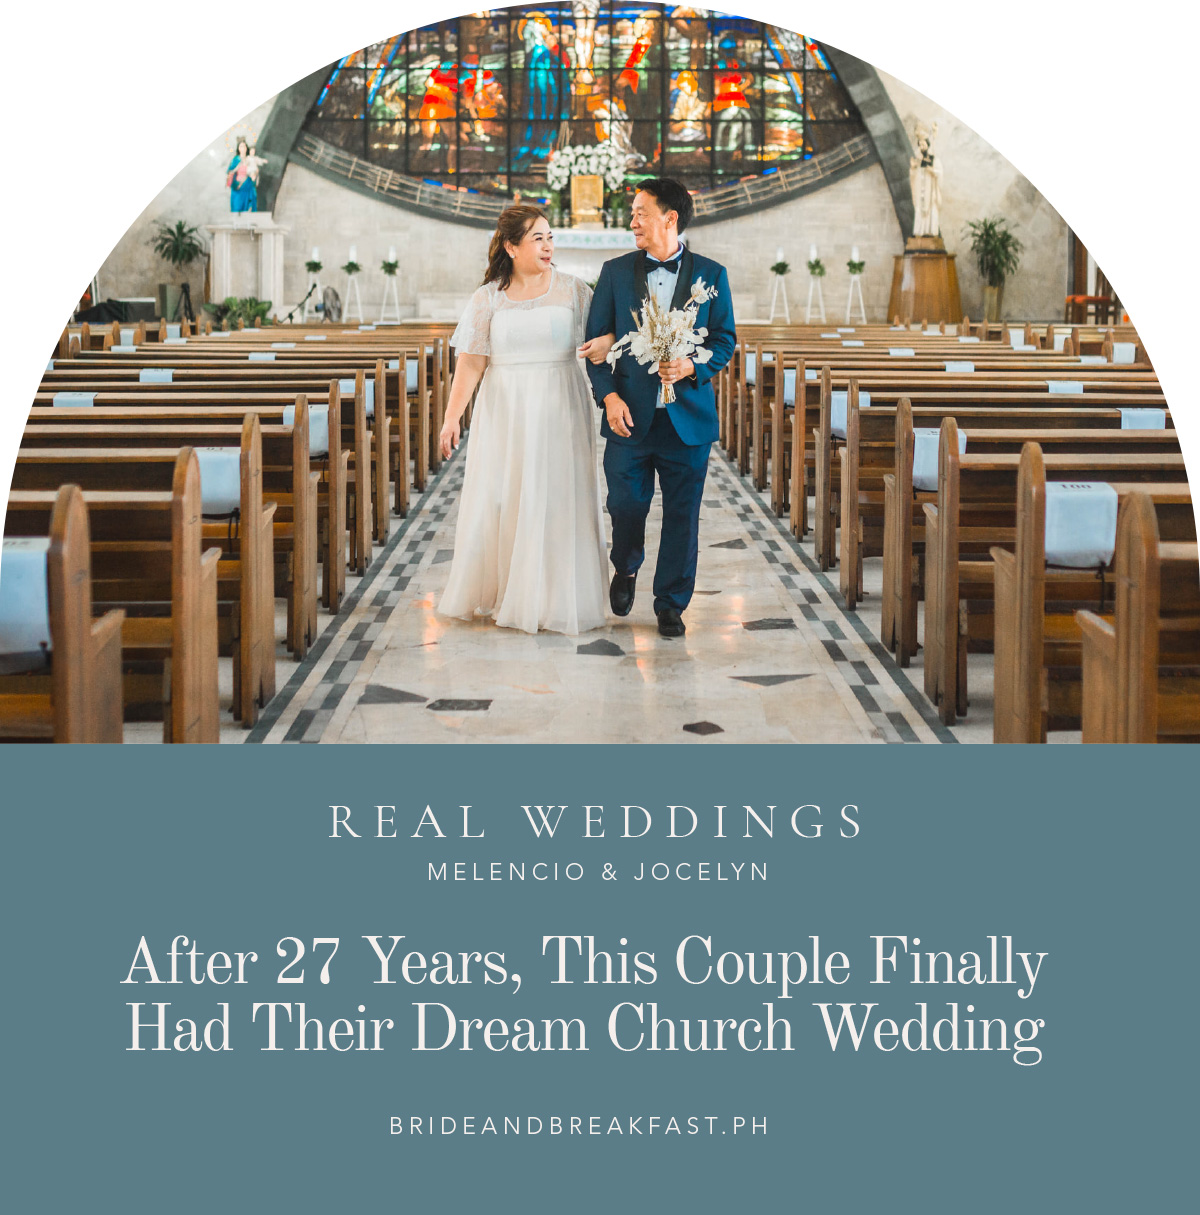 After 27 Years, This Couple Finally Had Their Dream Church Wedding